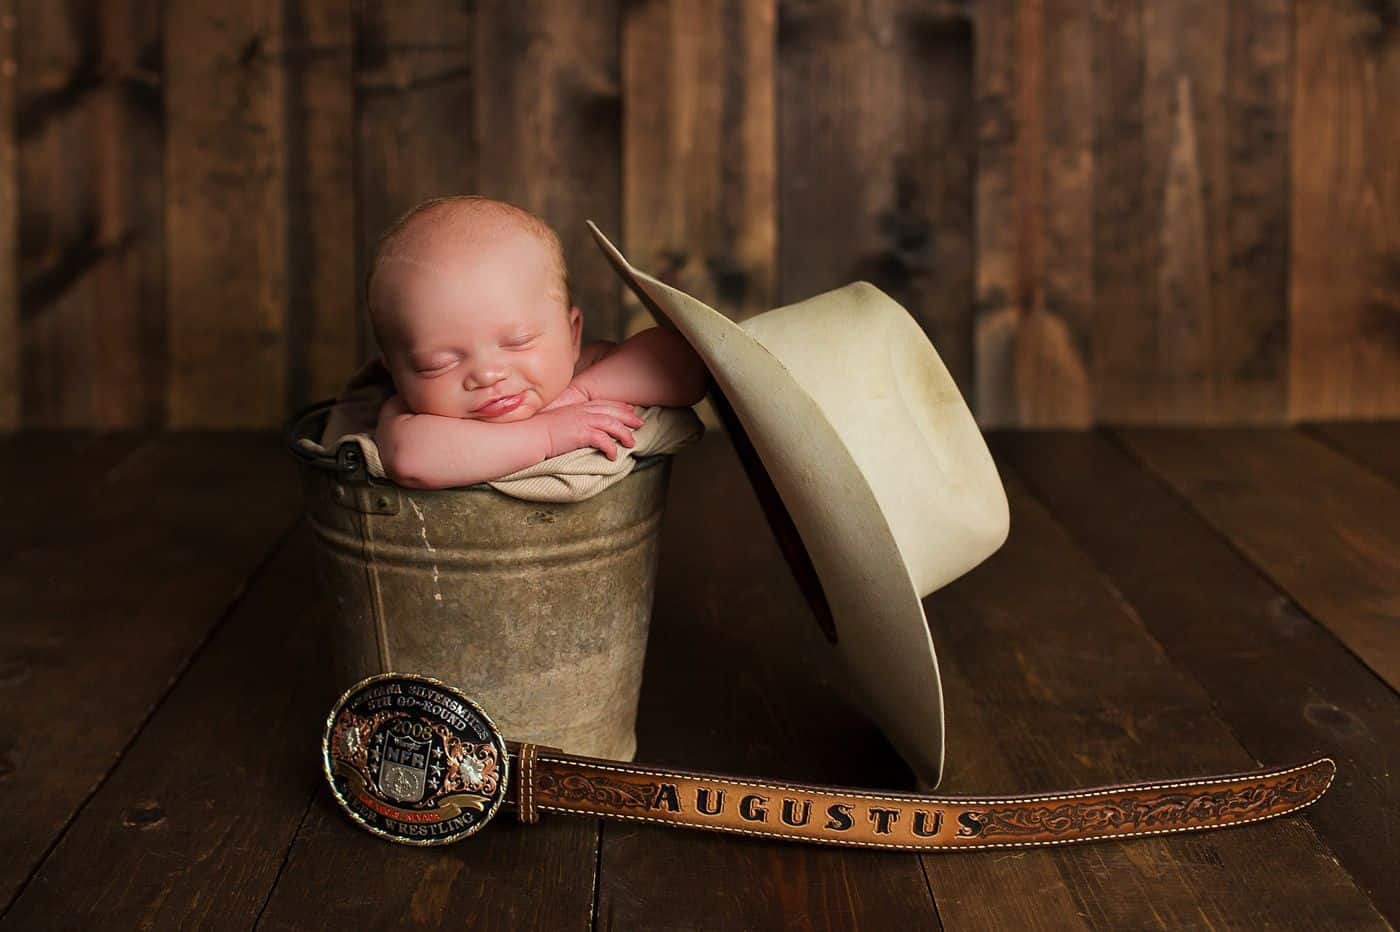 Newborn Photography Props: How To Make Photos That Are Classy & Cute